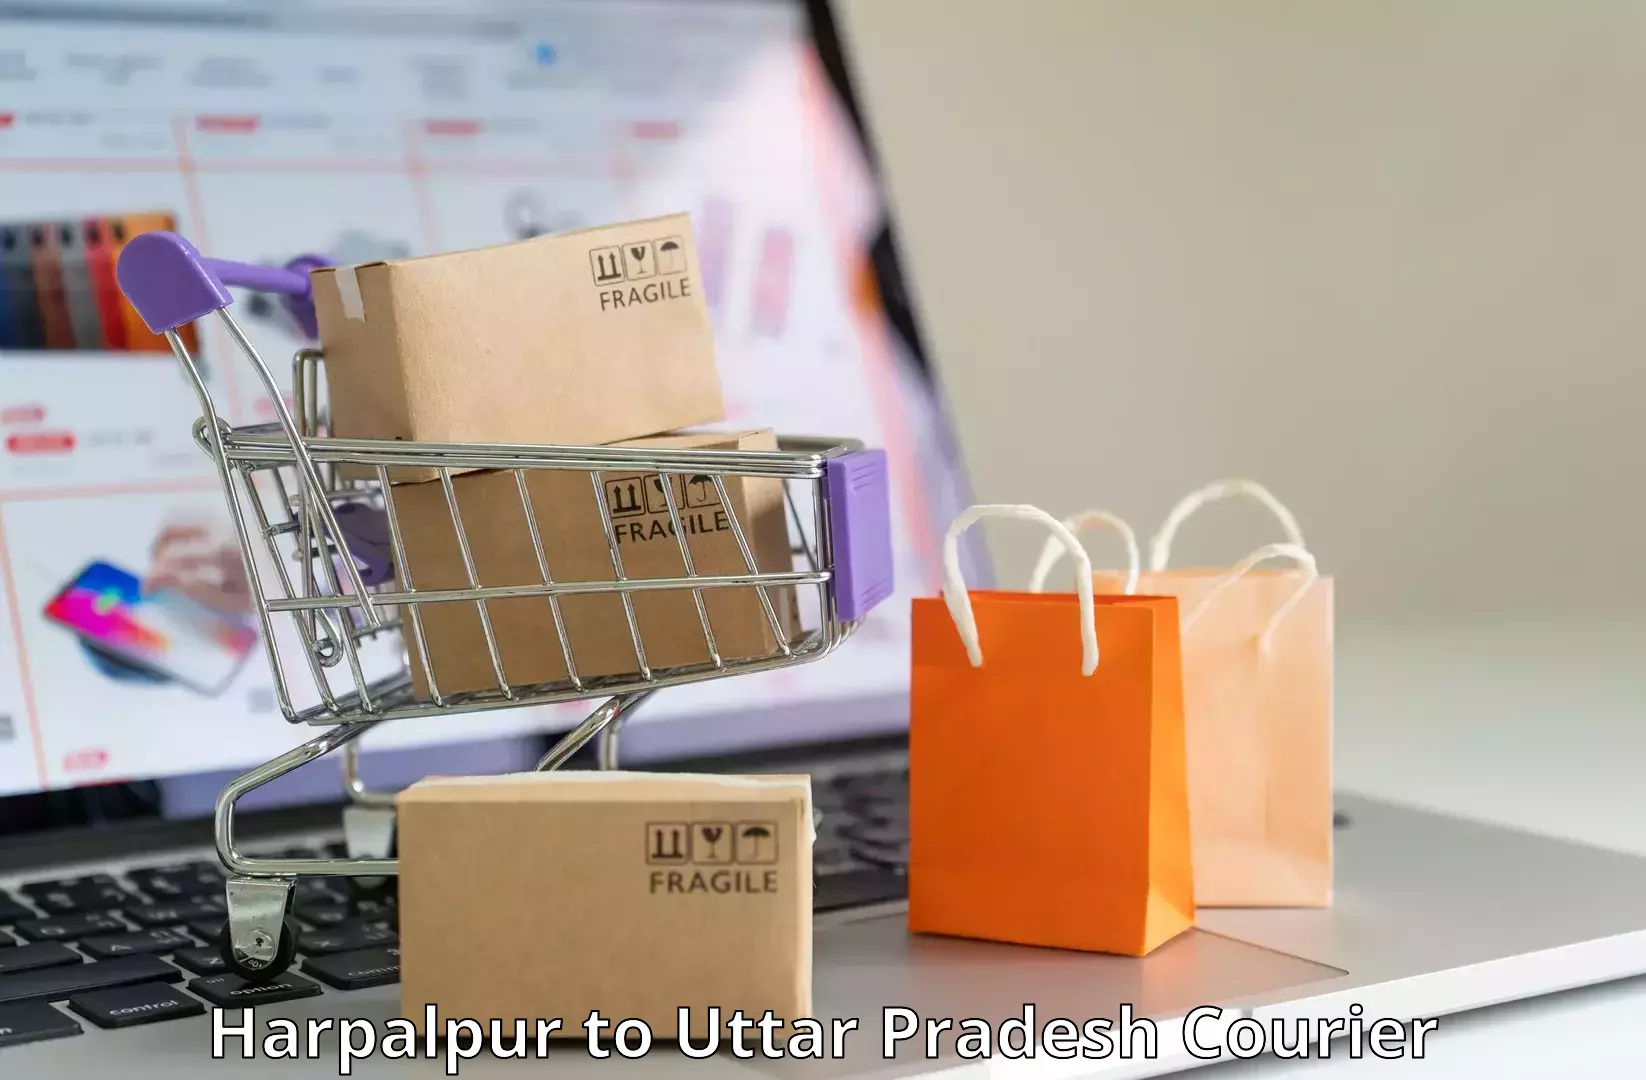 Domestic courier Harpalpur to Jalesar